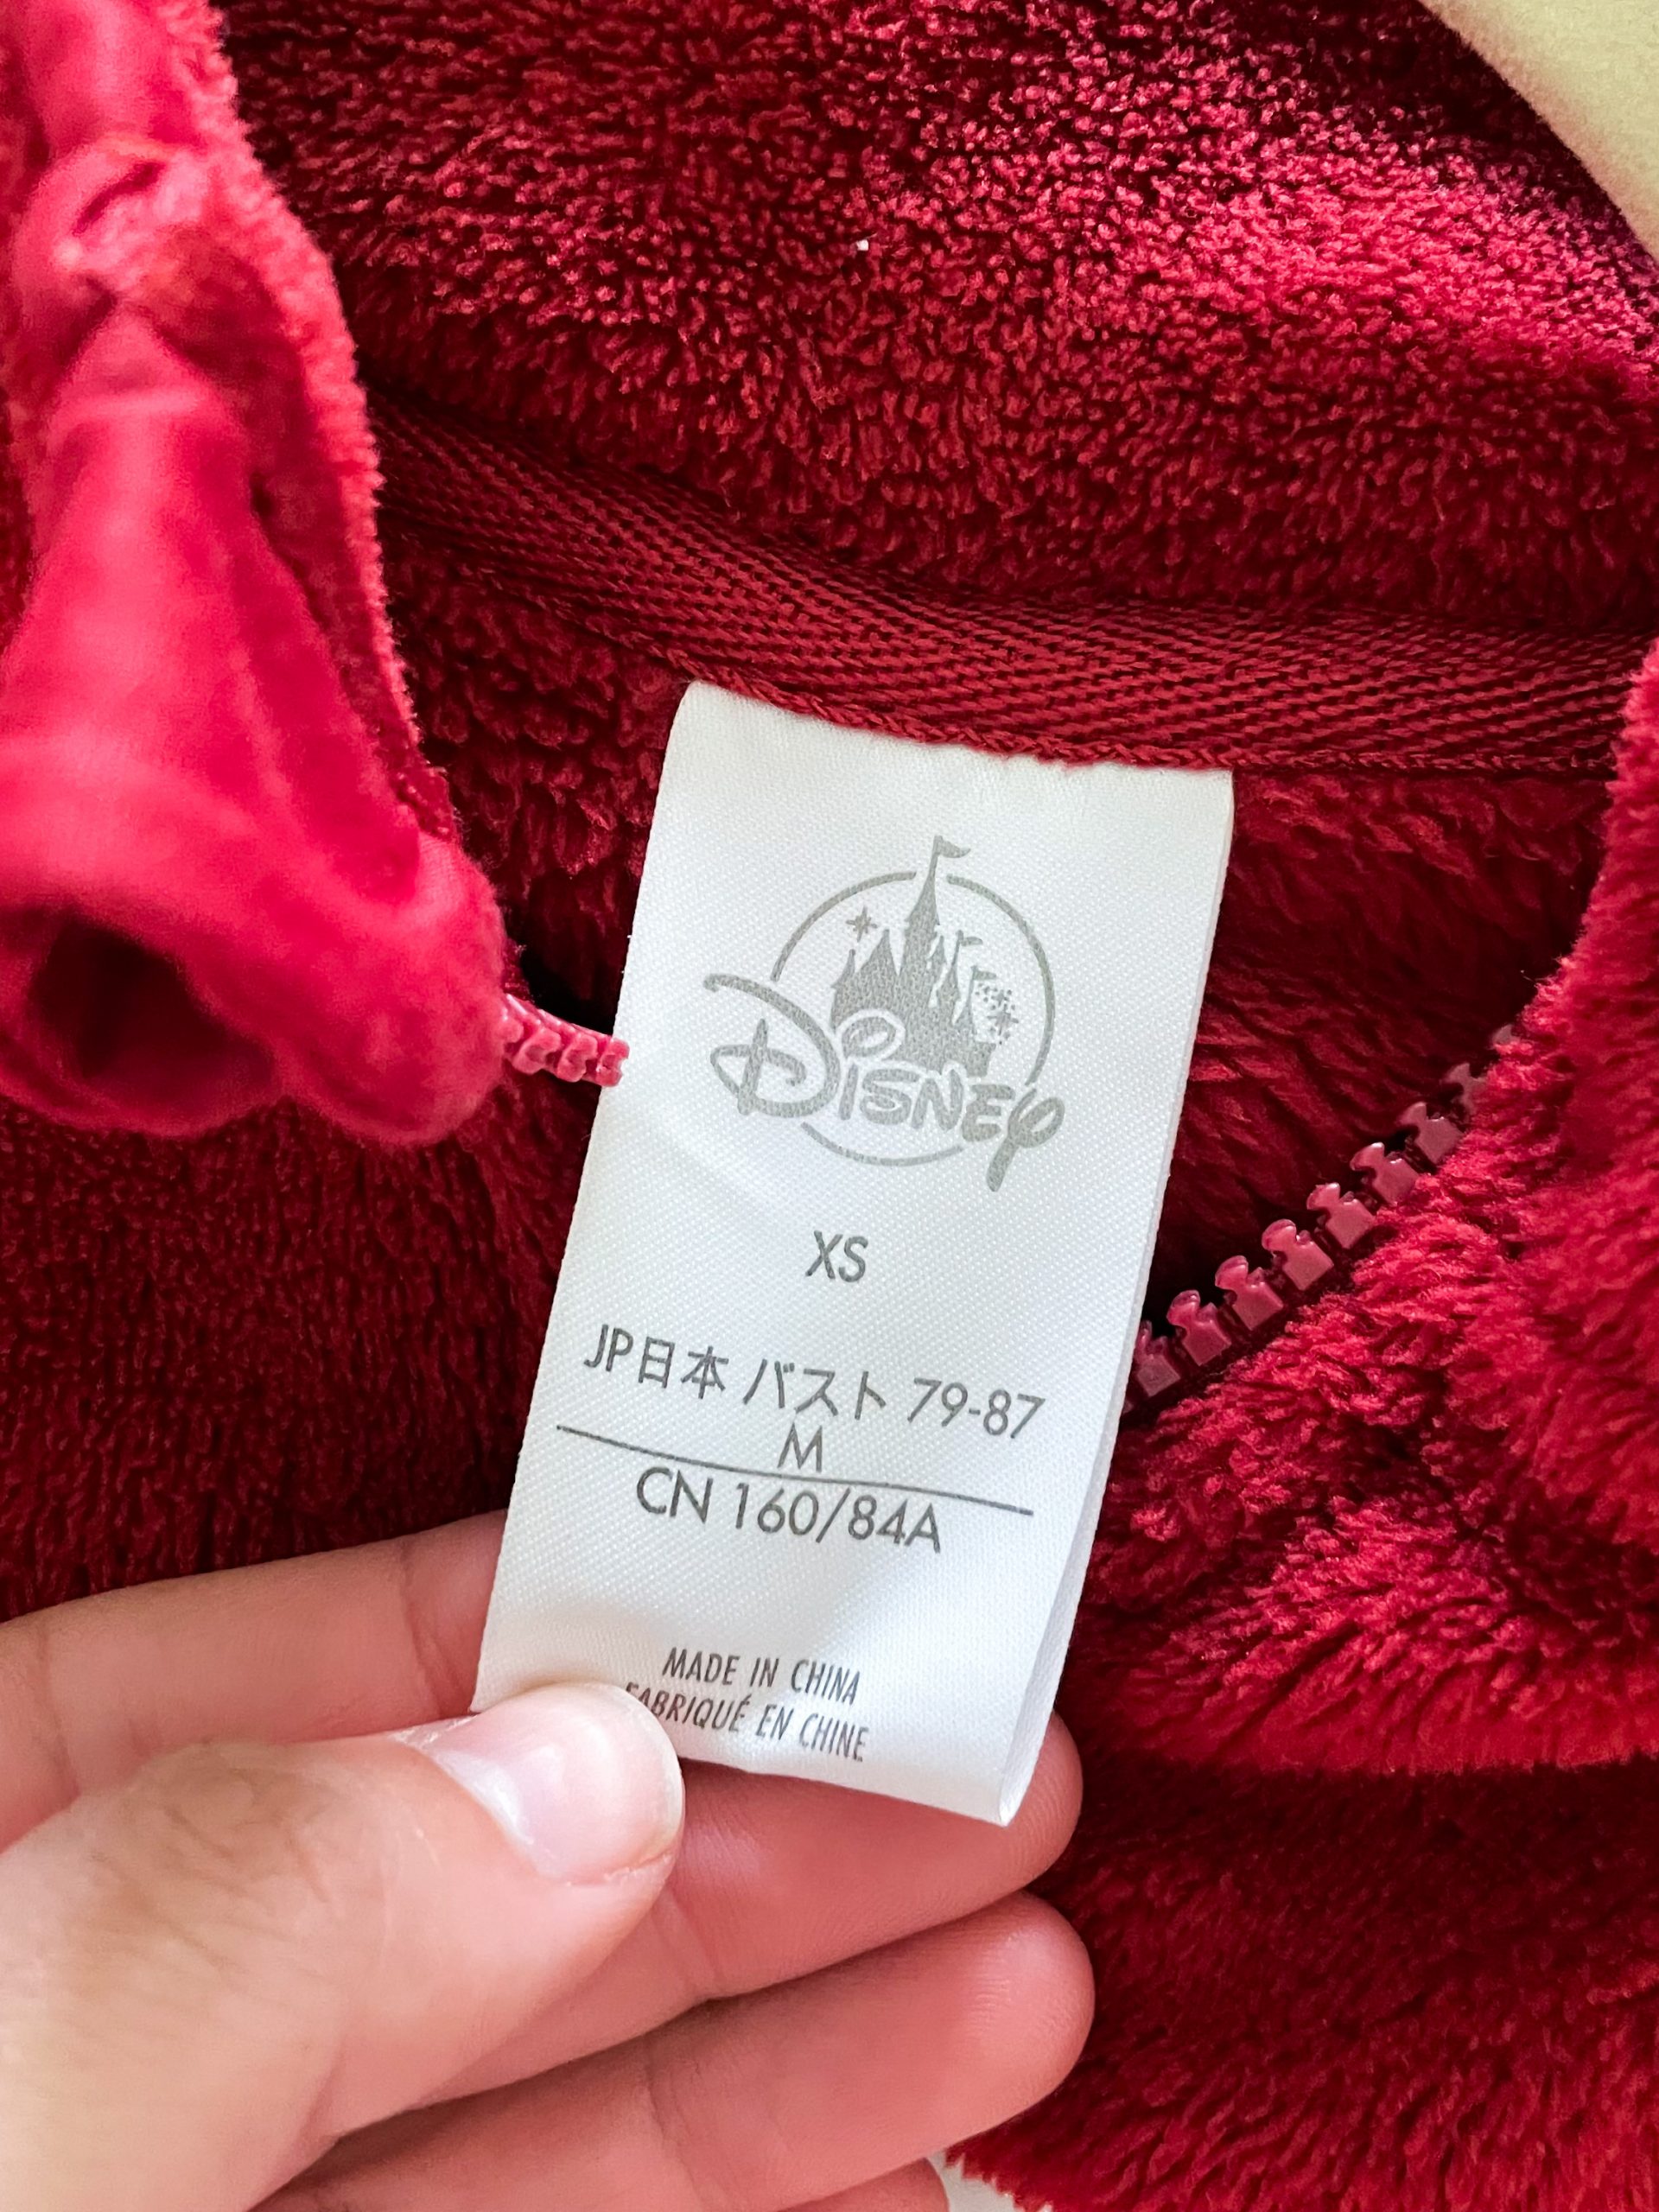 How to Find Disney Item Names and Stock Photos